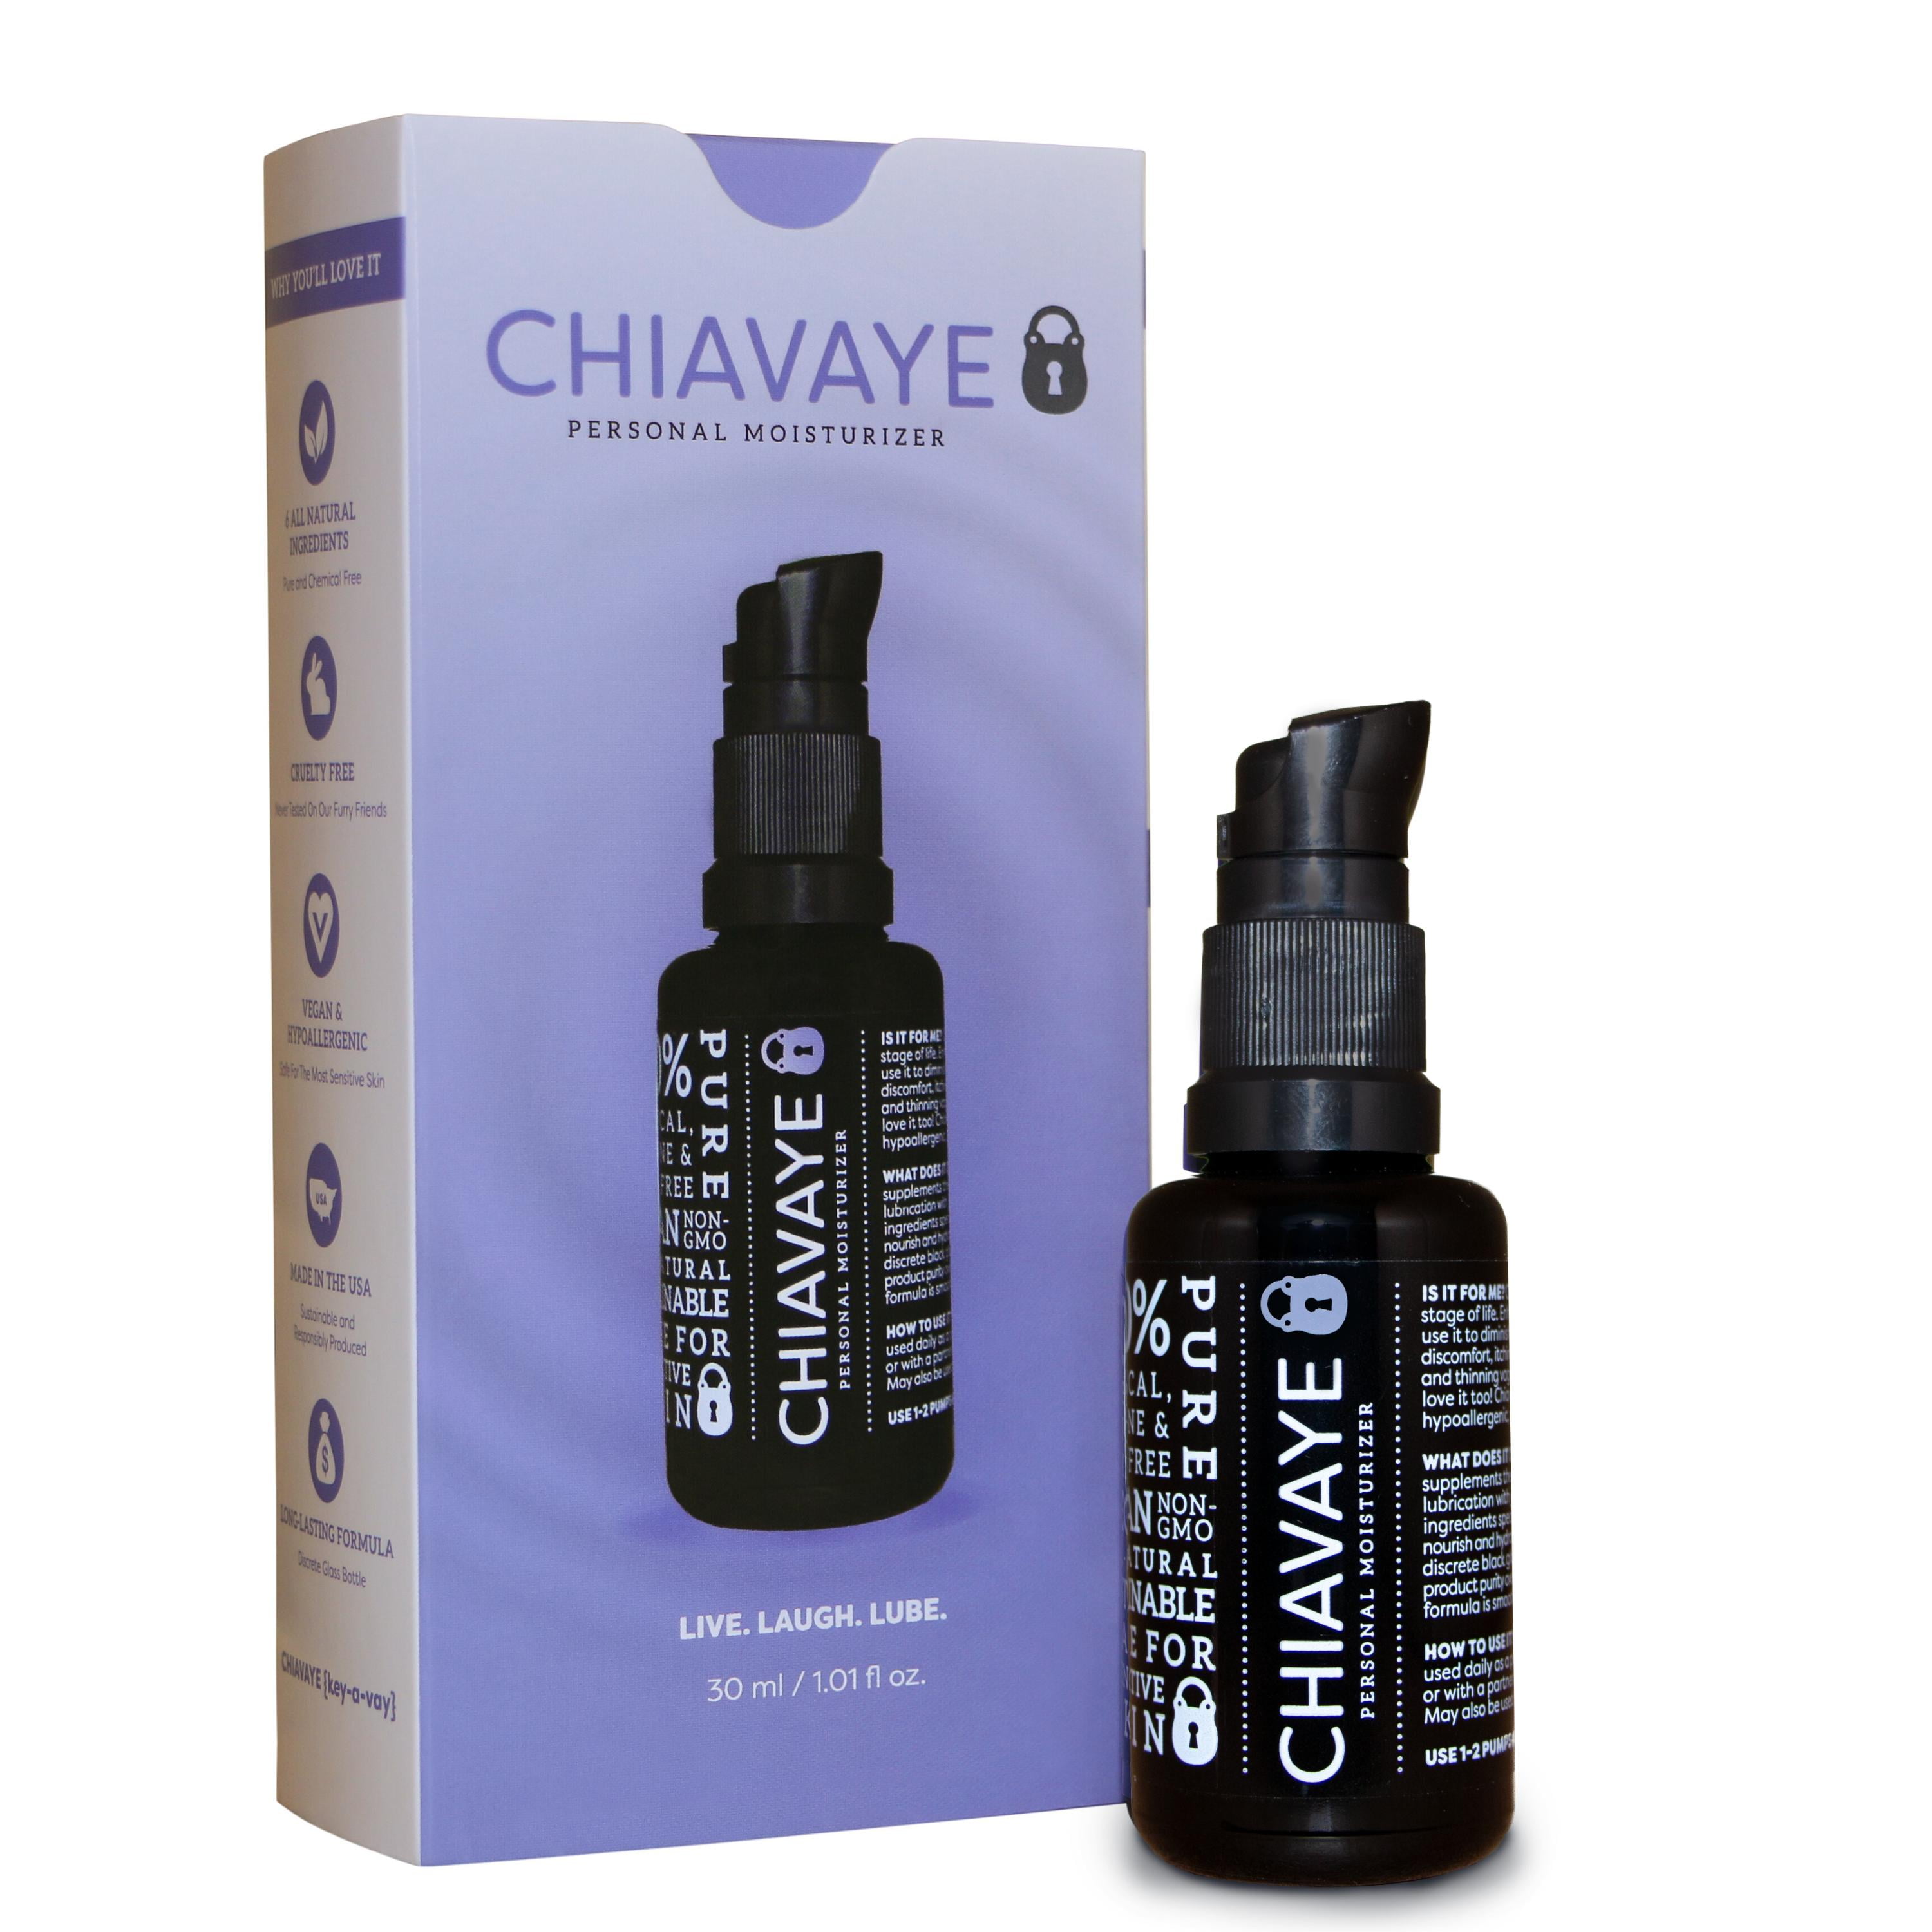 Chiavaye Personal Moisturizer and Lubricant, All Natural, Organic - 30ml photo